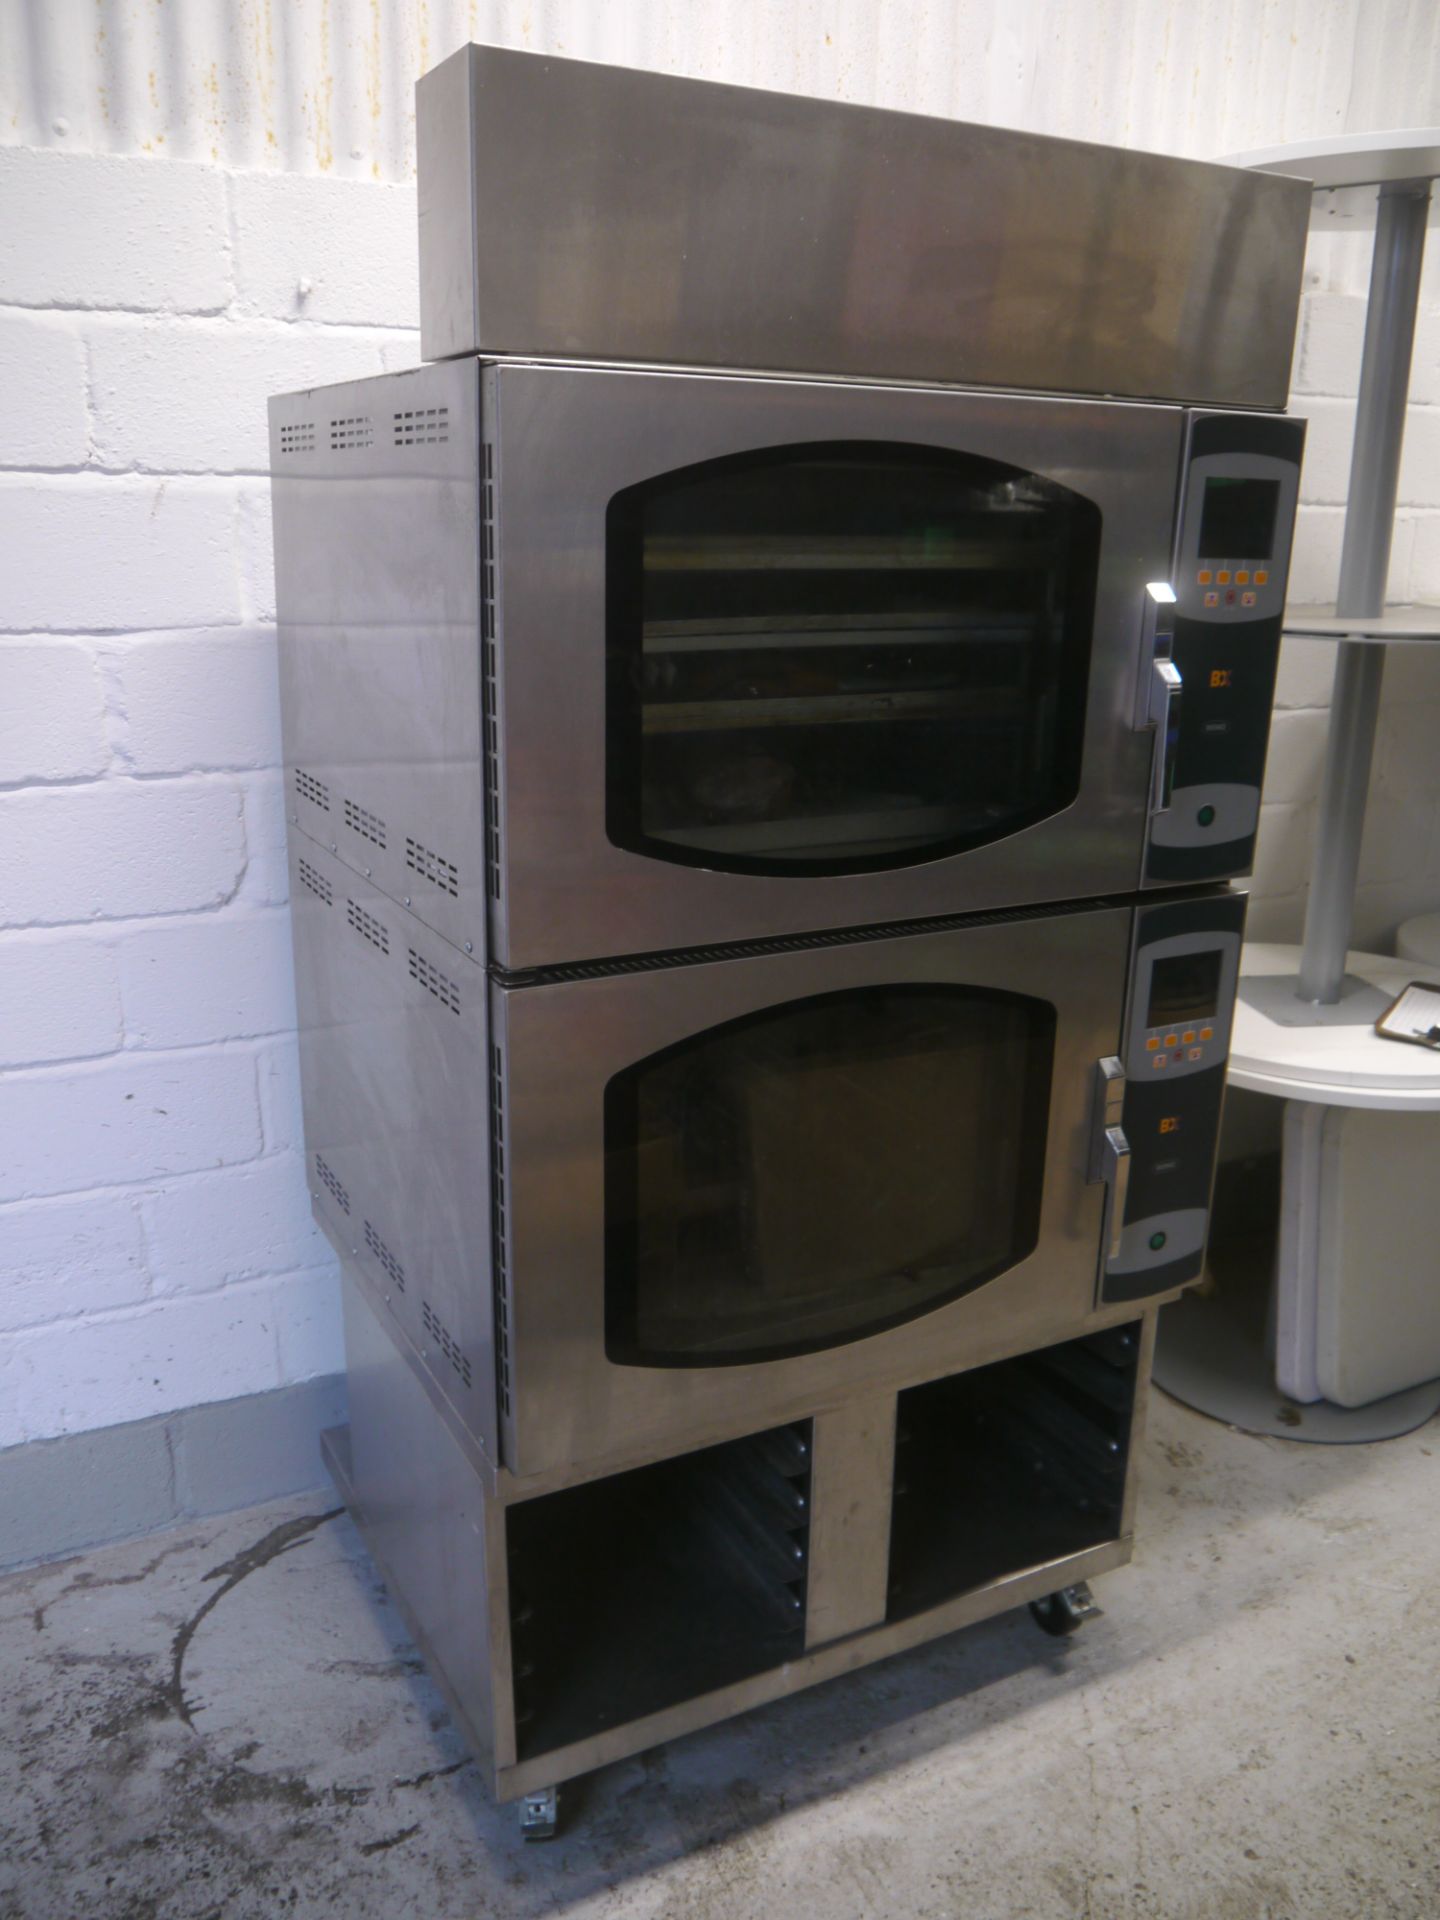 * mono bx double bakery oven in amazing condition harly used.comes compete with trays and stand